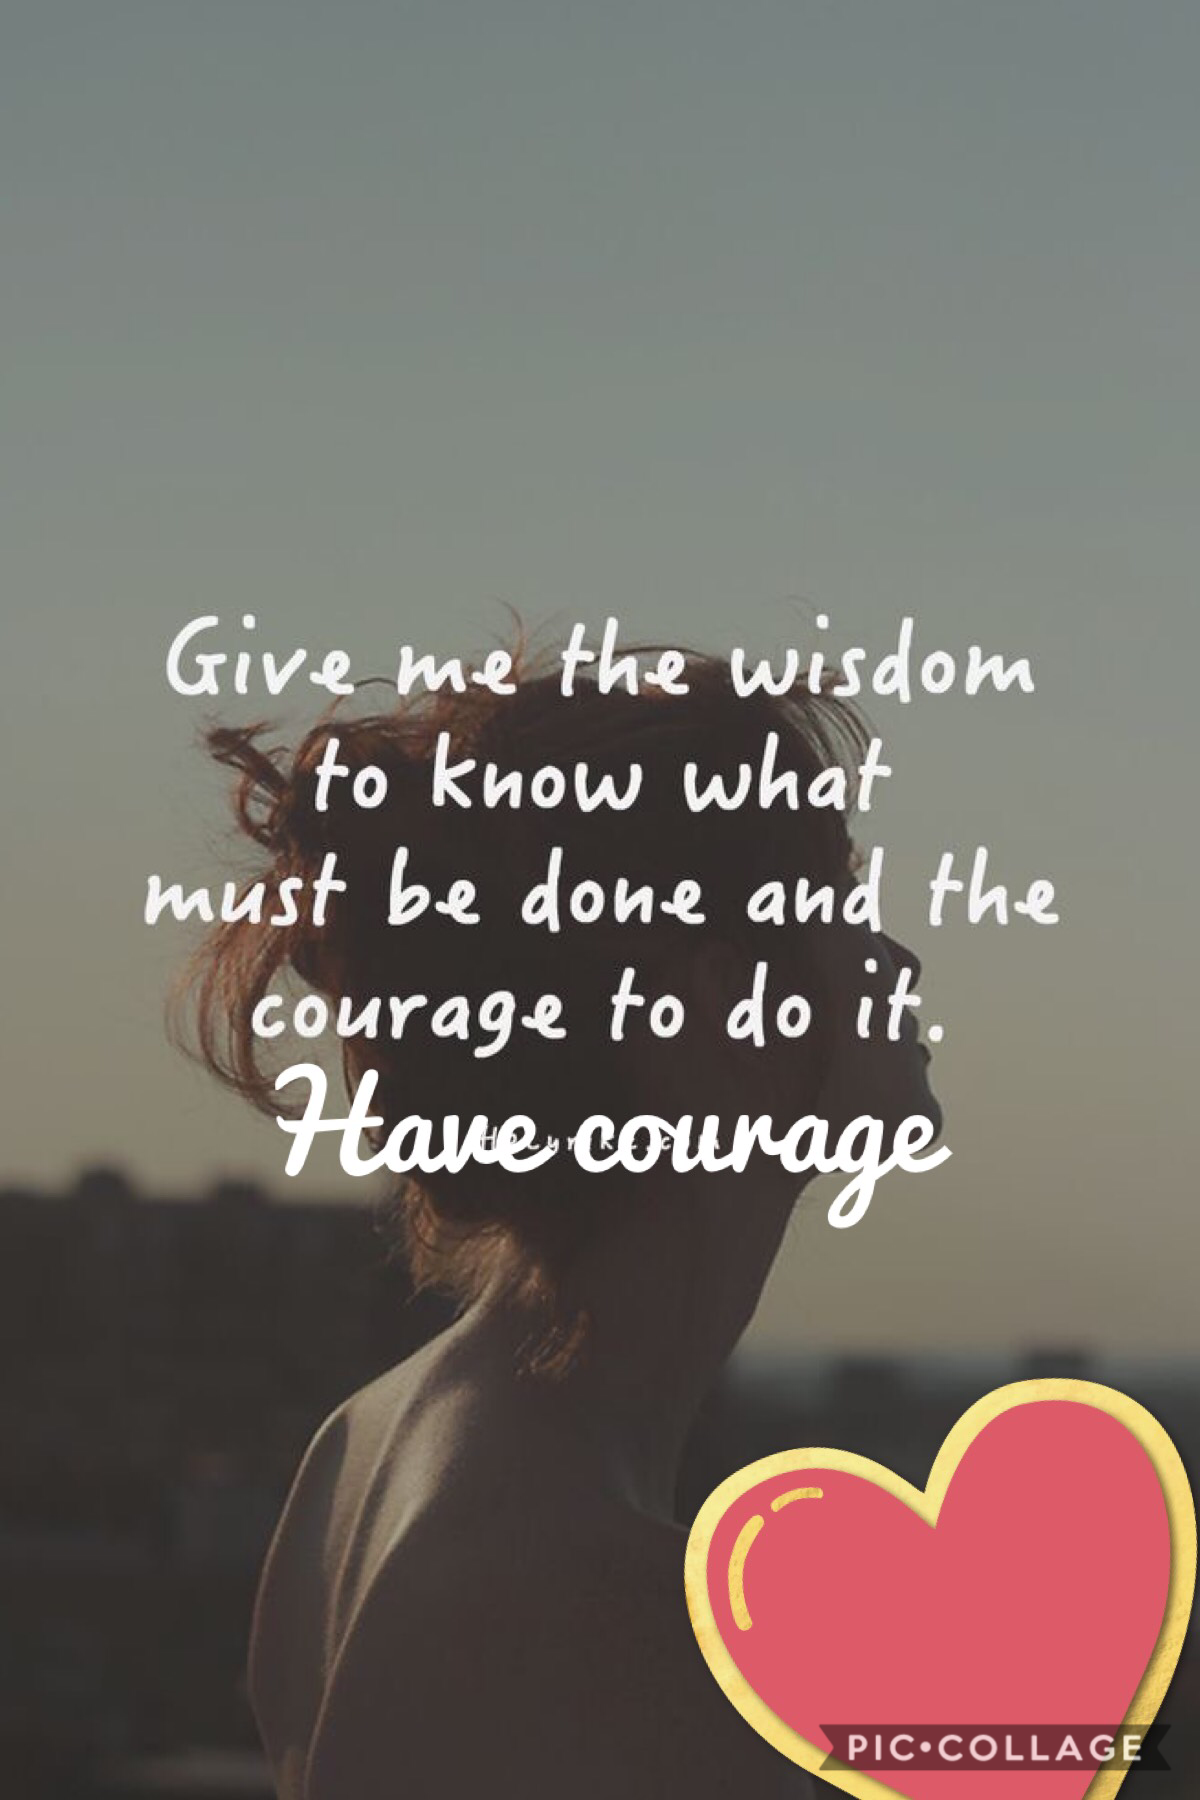 Have all the courage you have ! :D